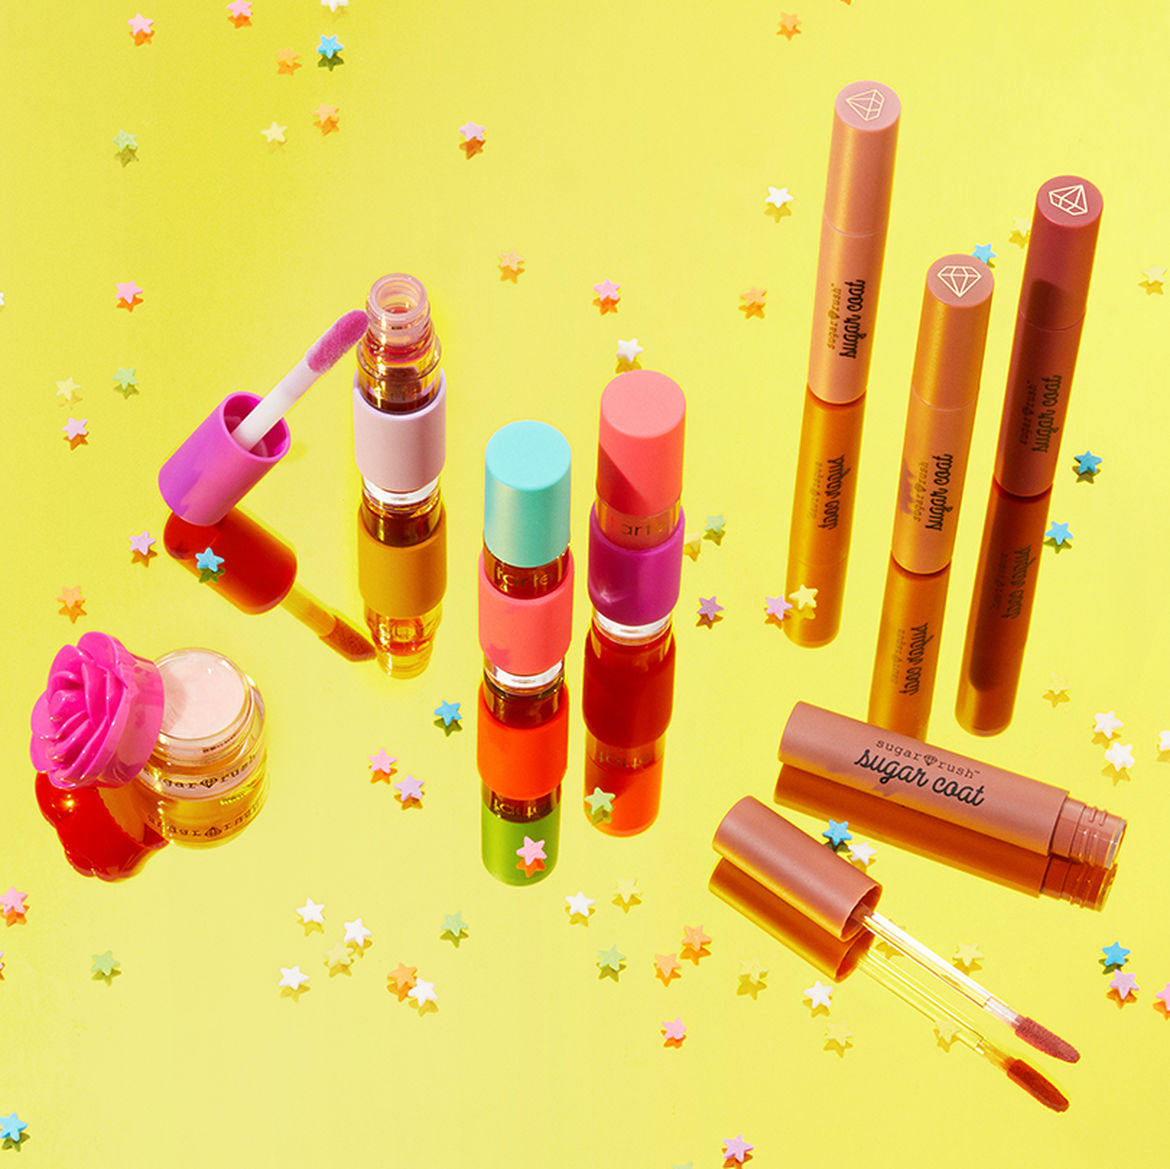 New Launches and Introducing Sugar Rush By Tarte Cosmetics! 